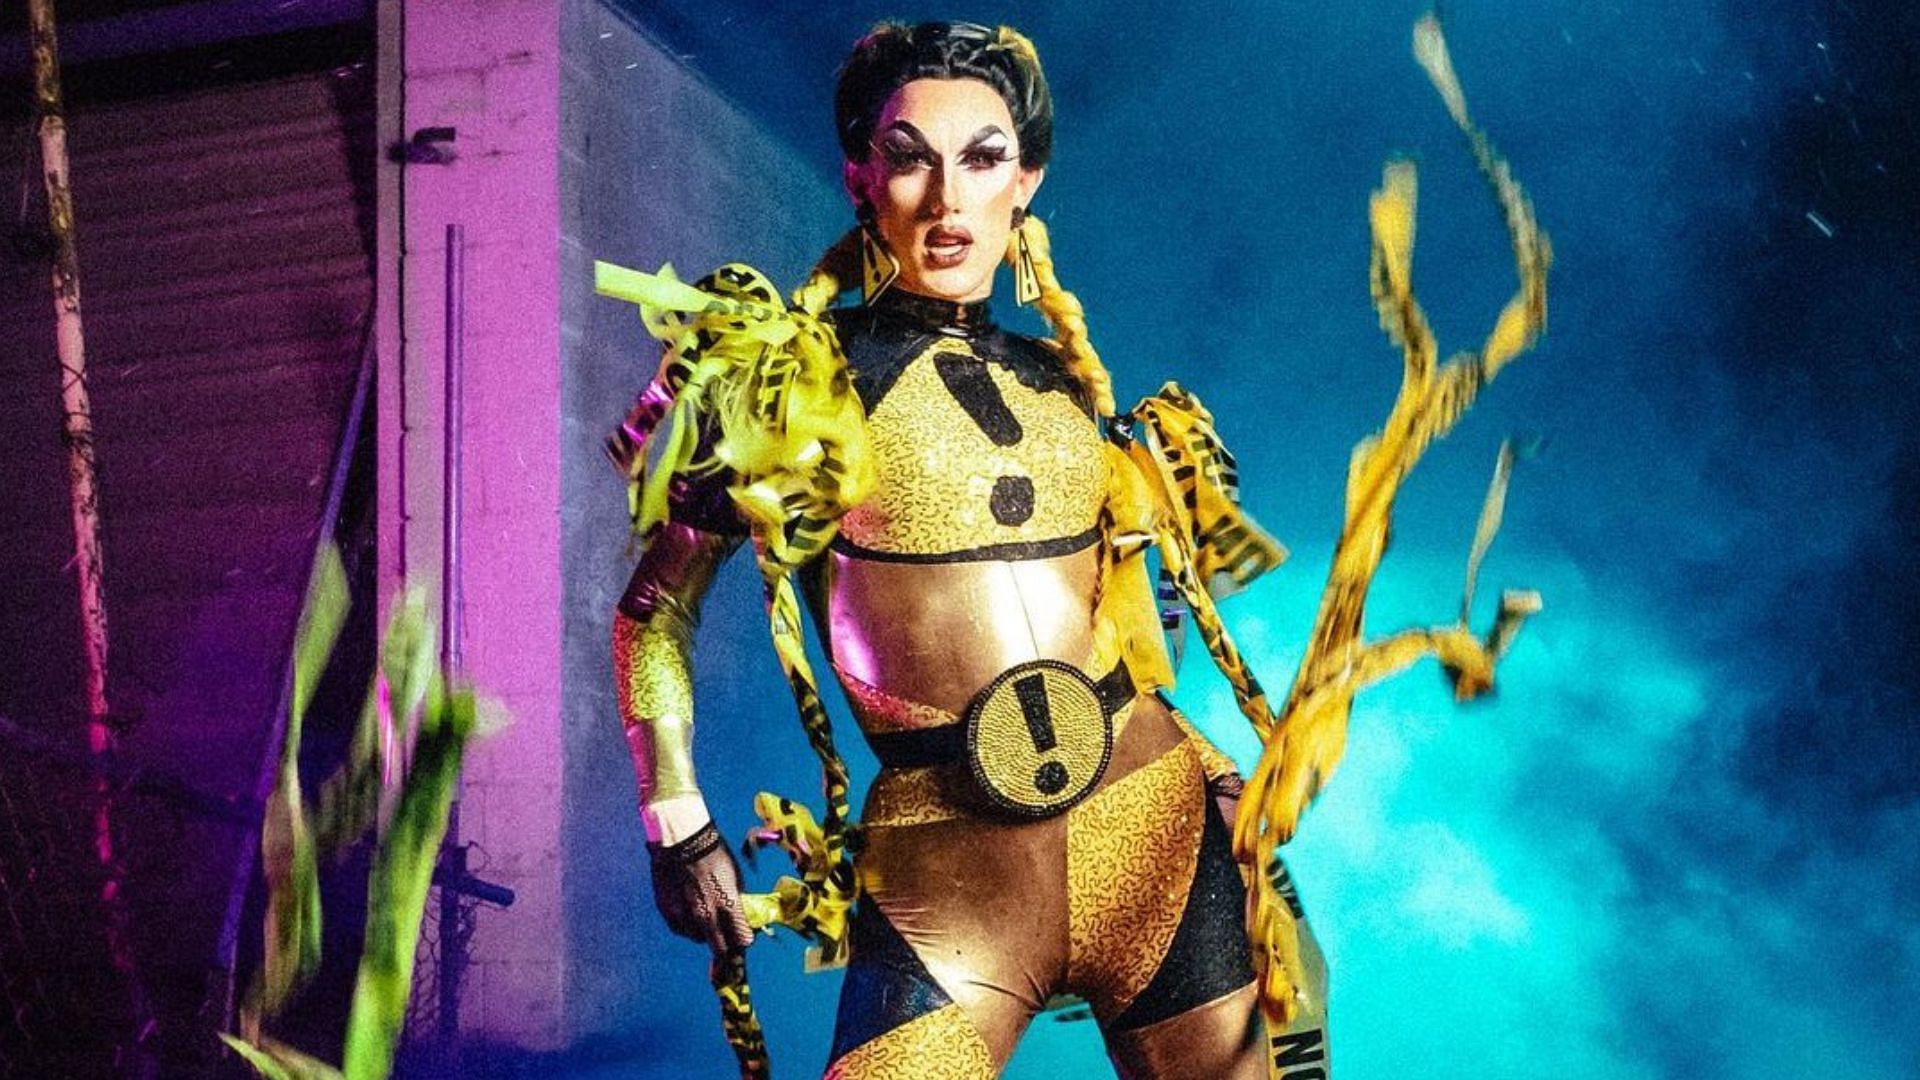 Beverly Kills to participate in Drag Race Down Under airing July 30 (Image via Instagram/@thebeverlykills)